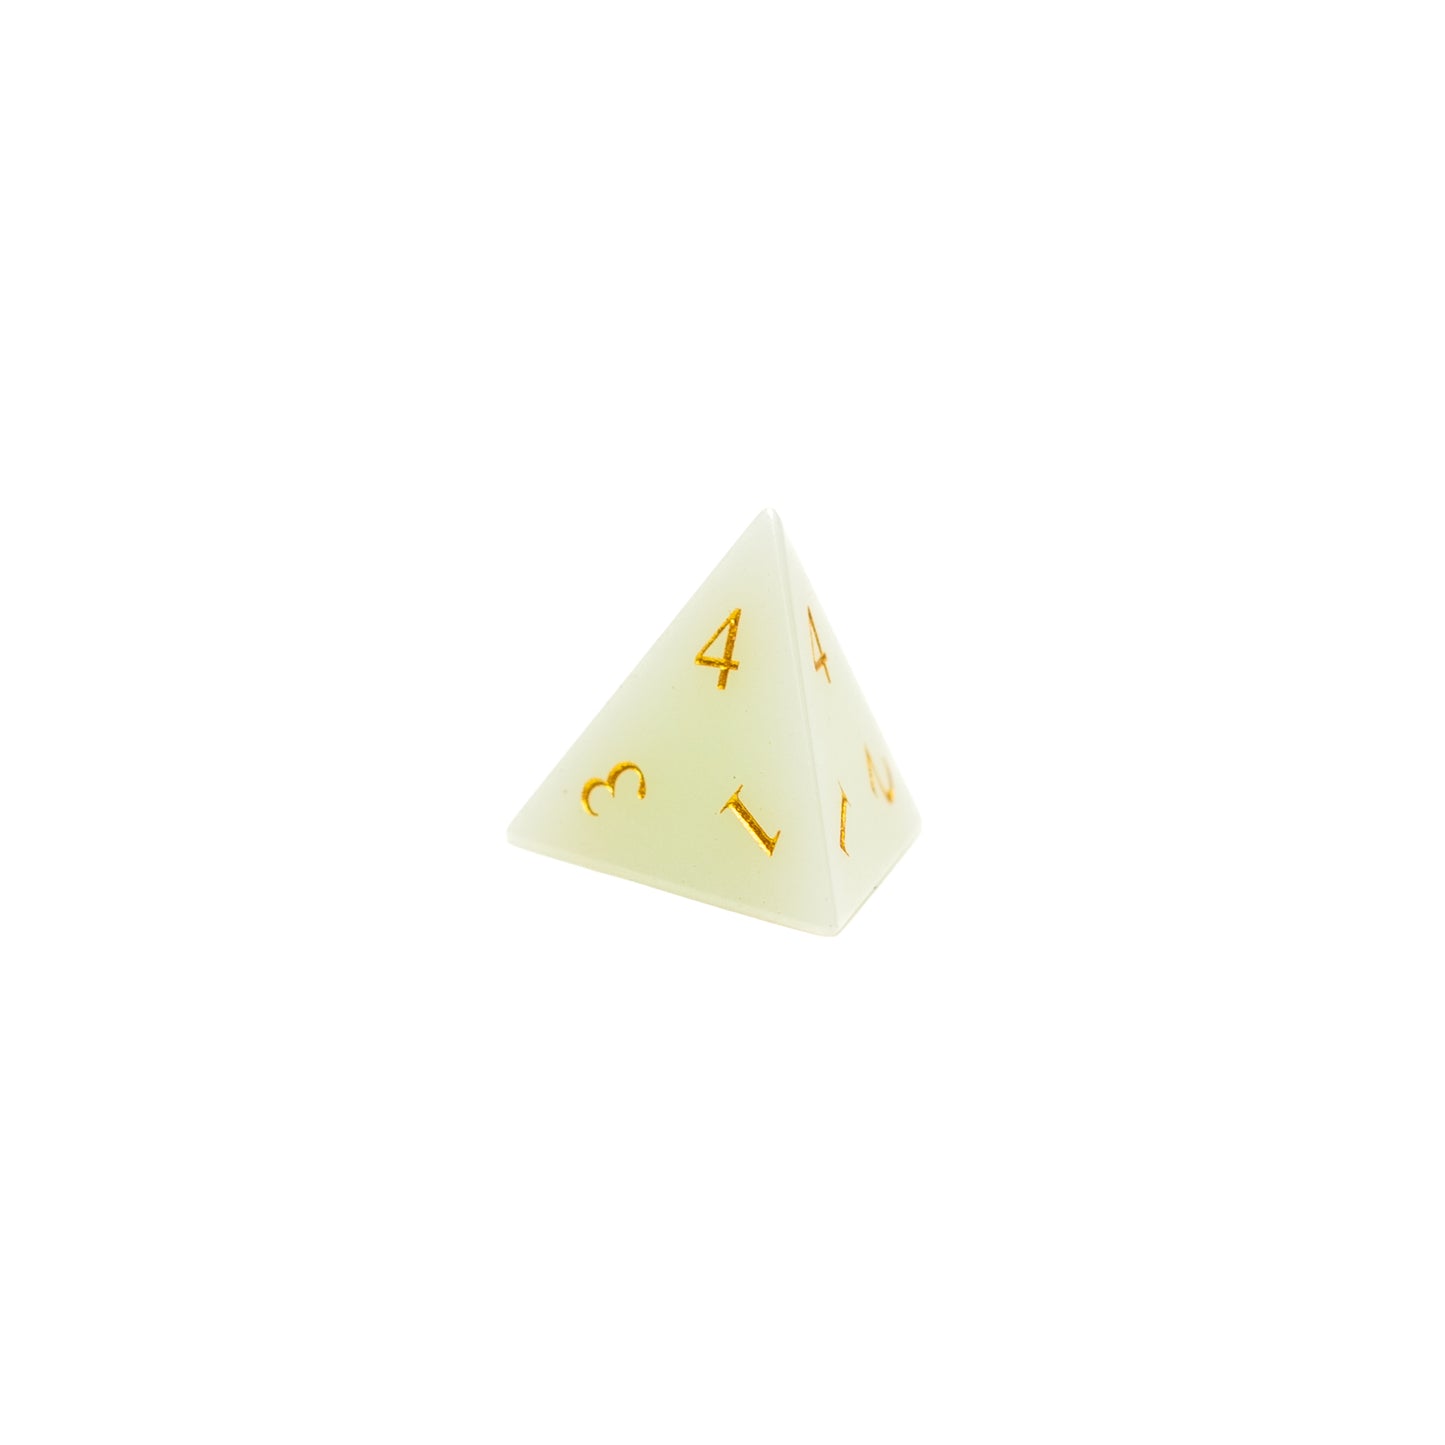 Roll Britannia Glow in the Dark Gemstone Dungeons and Dragons D4 Dice